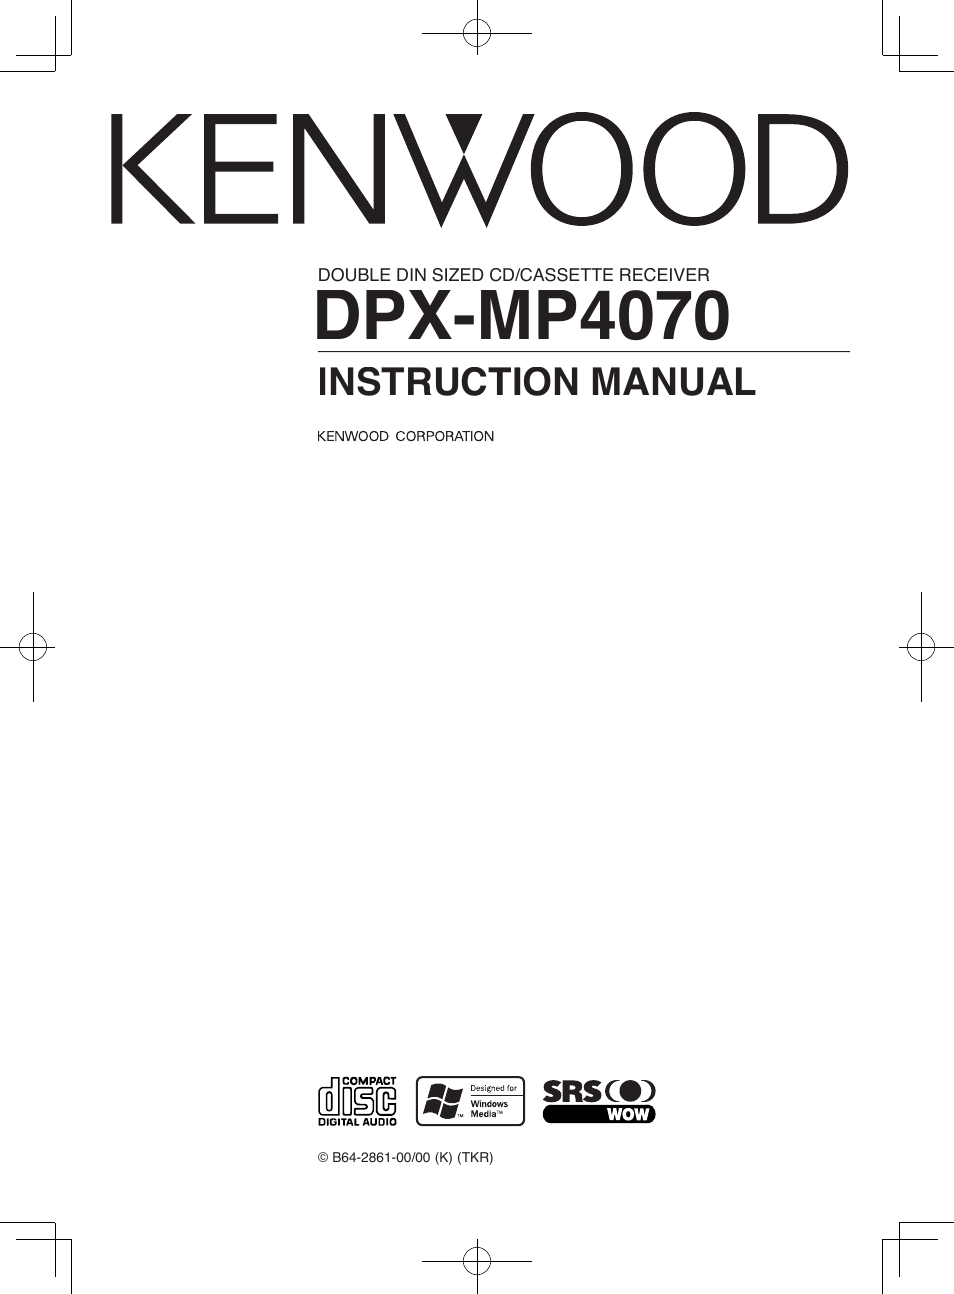 Kenwood DPX-MP4070  EN User Manual | 40 pages